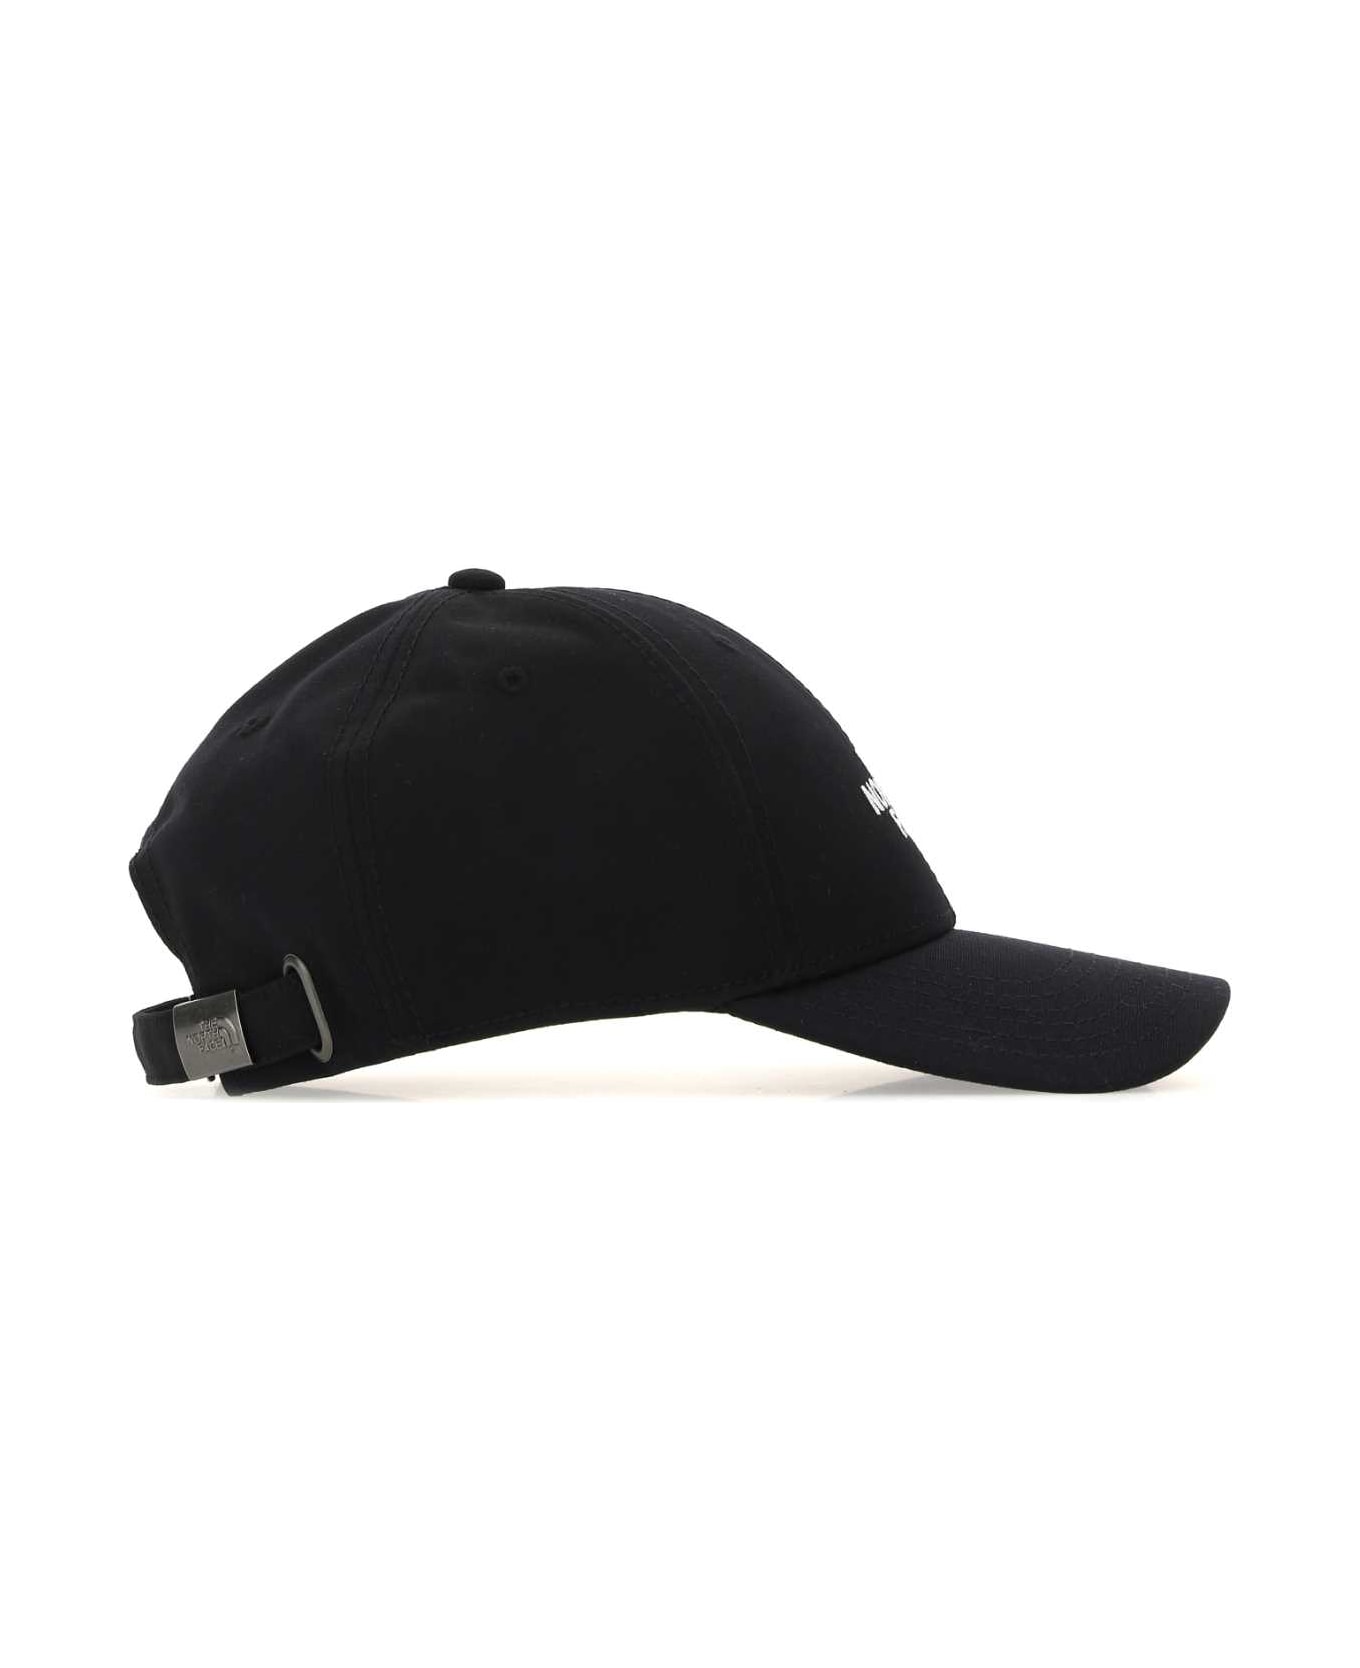 The North Face Black Polyester Baseball Cap - KY41